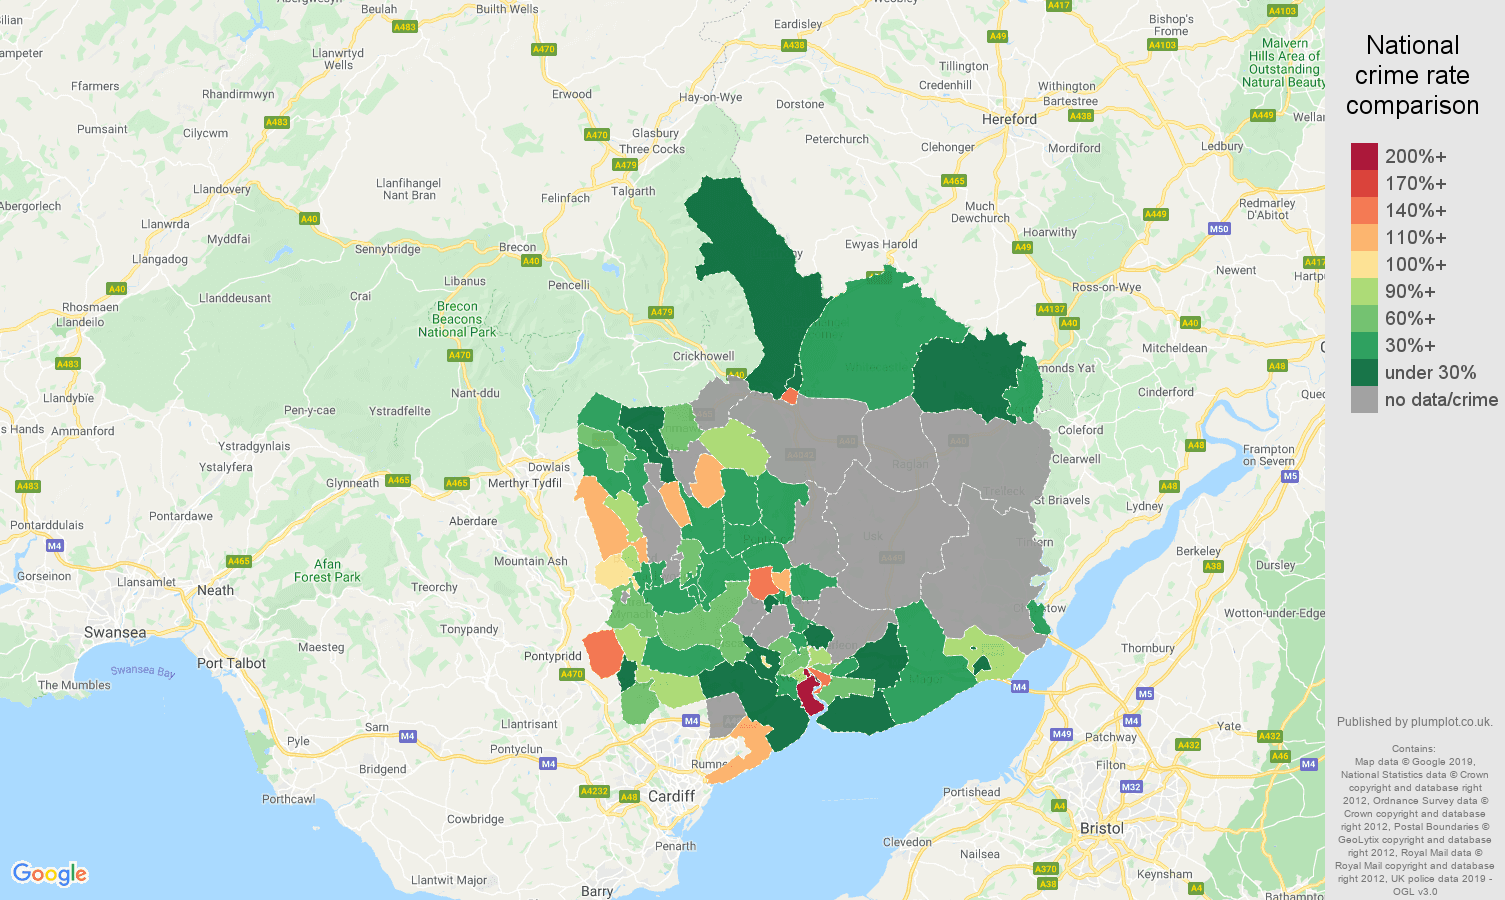 Gwent possession of weapons crime rate comparison map